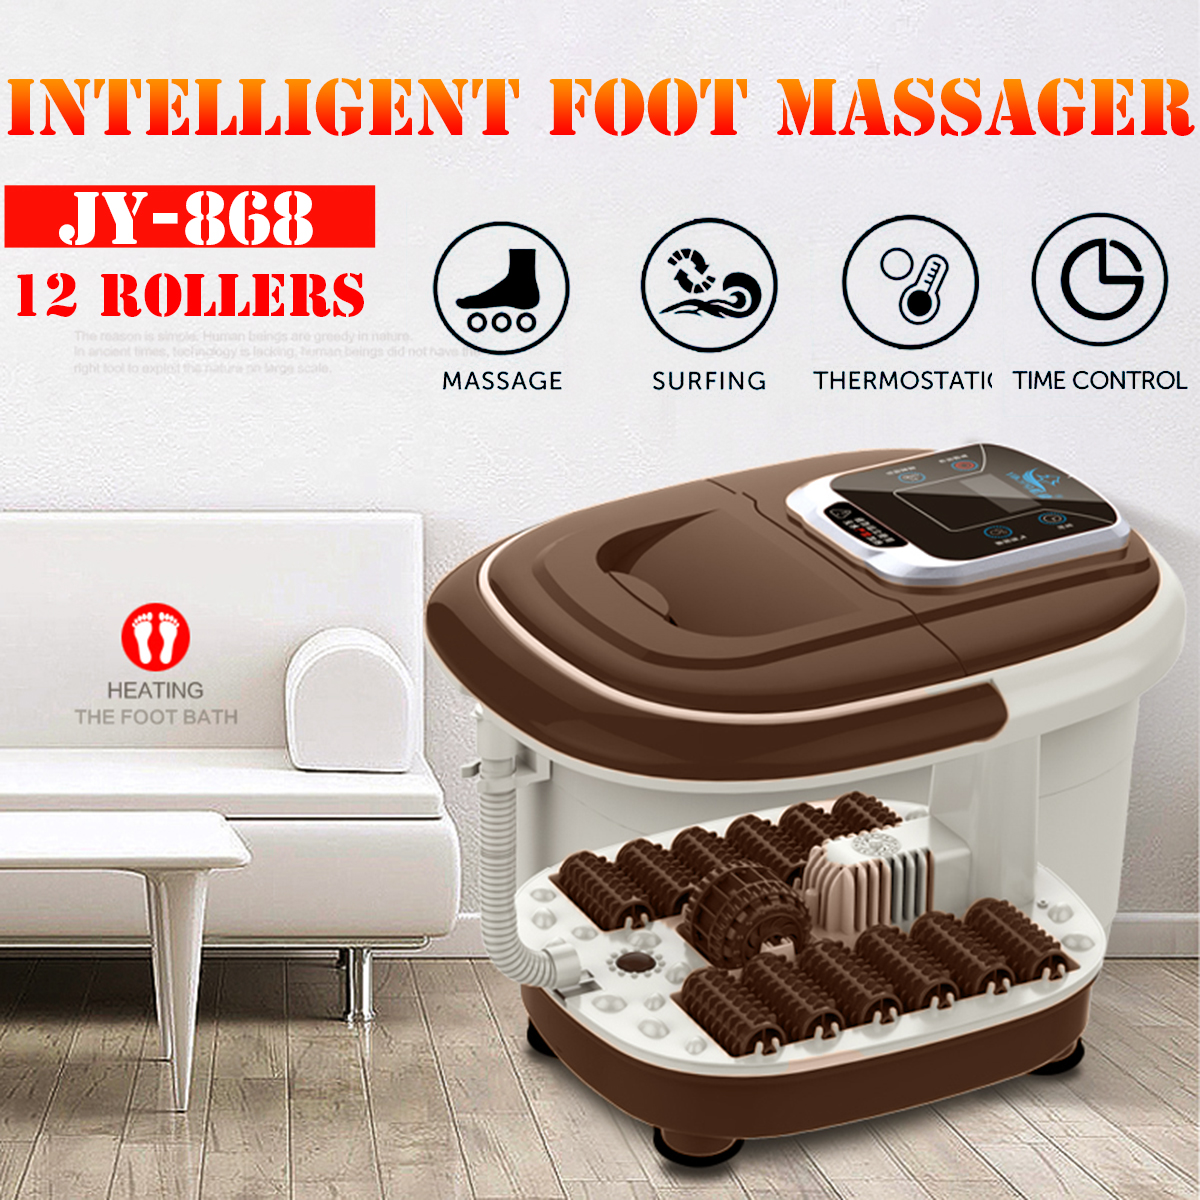 220V-Foot-Spa-Bath-Electric-Massager-TemTime-Set-Heat-Bubble-Vibration-Water-Fall-W4-Roller-1405731